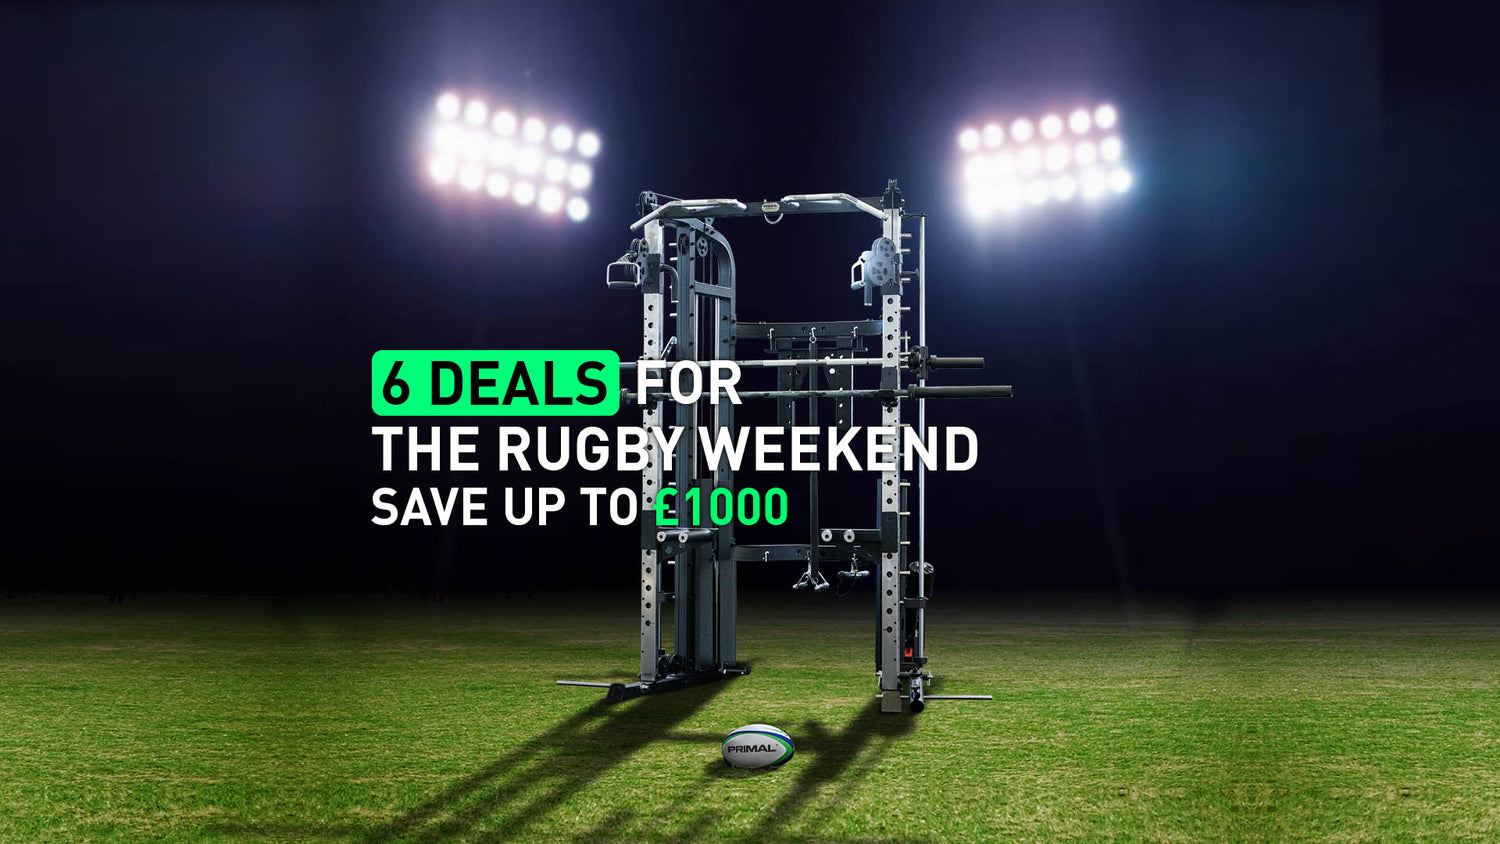 6 Deals For the Rugby Weekend